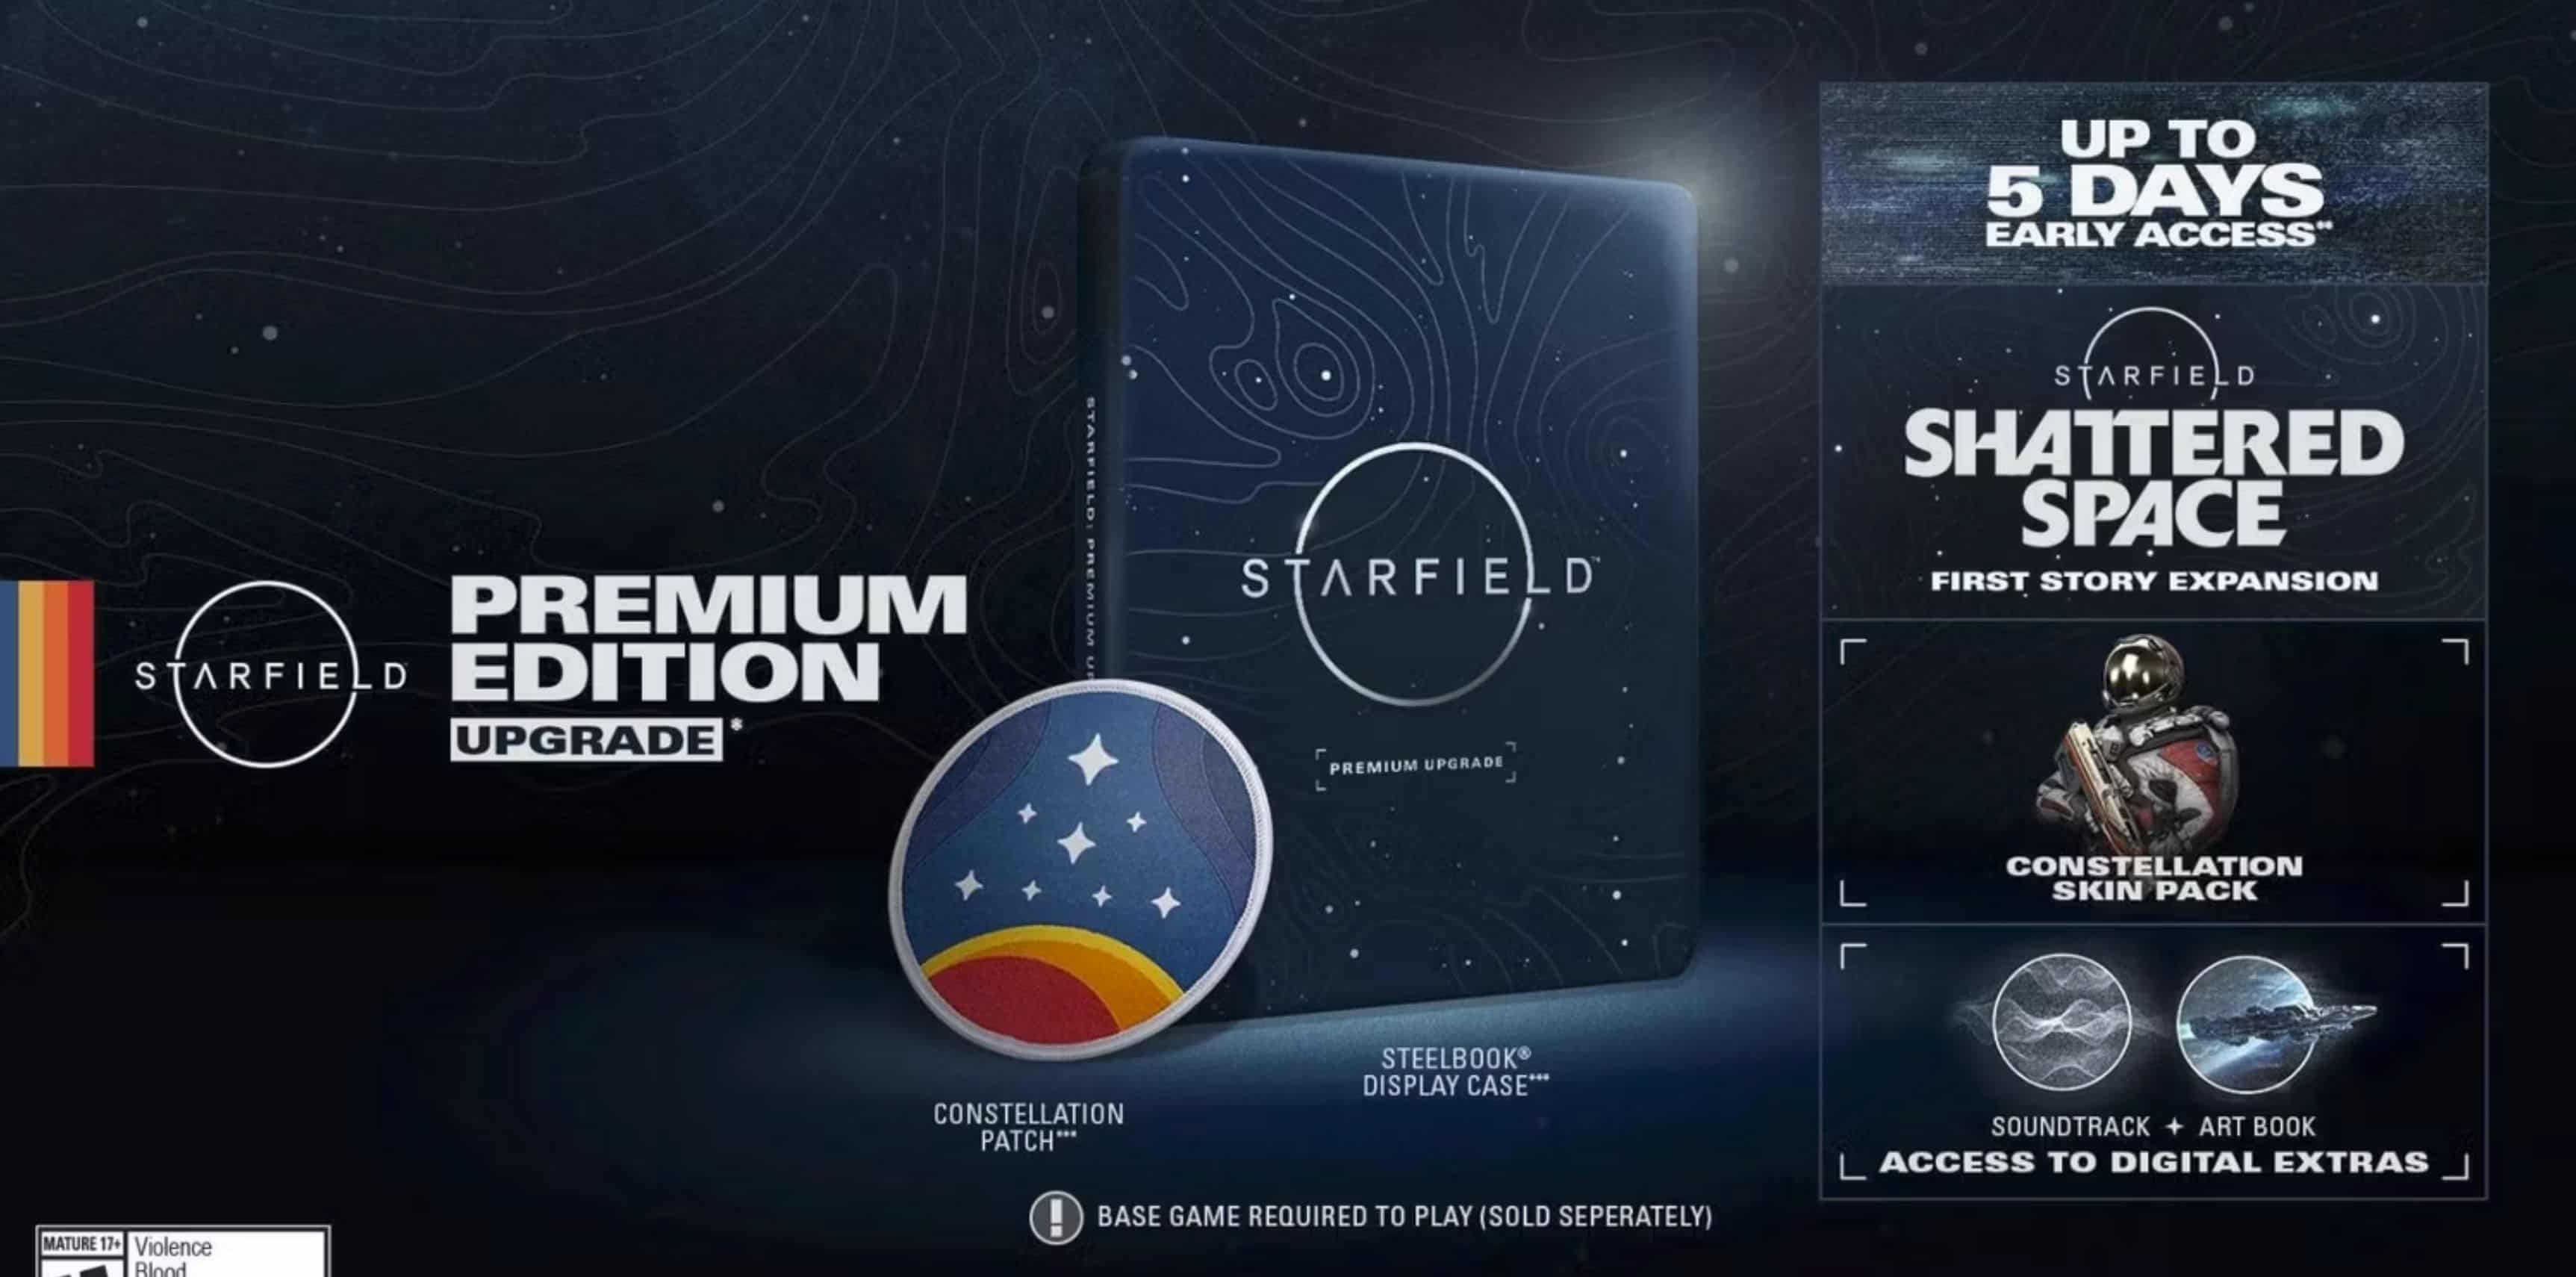 Every Starfield player should use these 3 essential mods